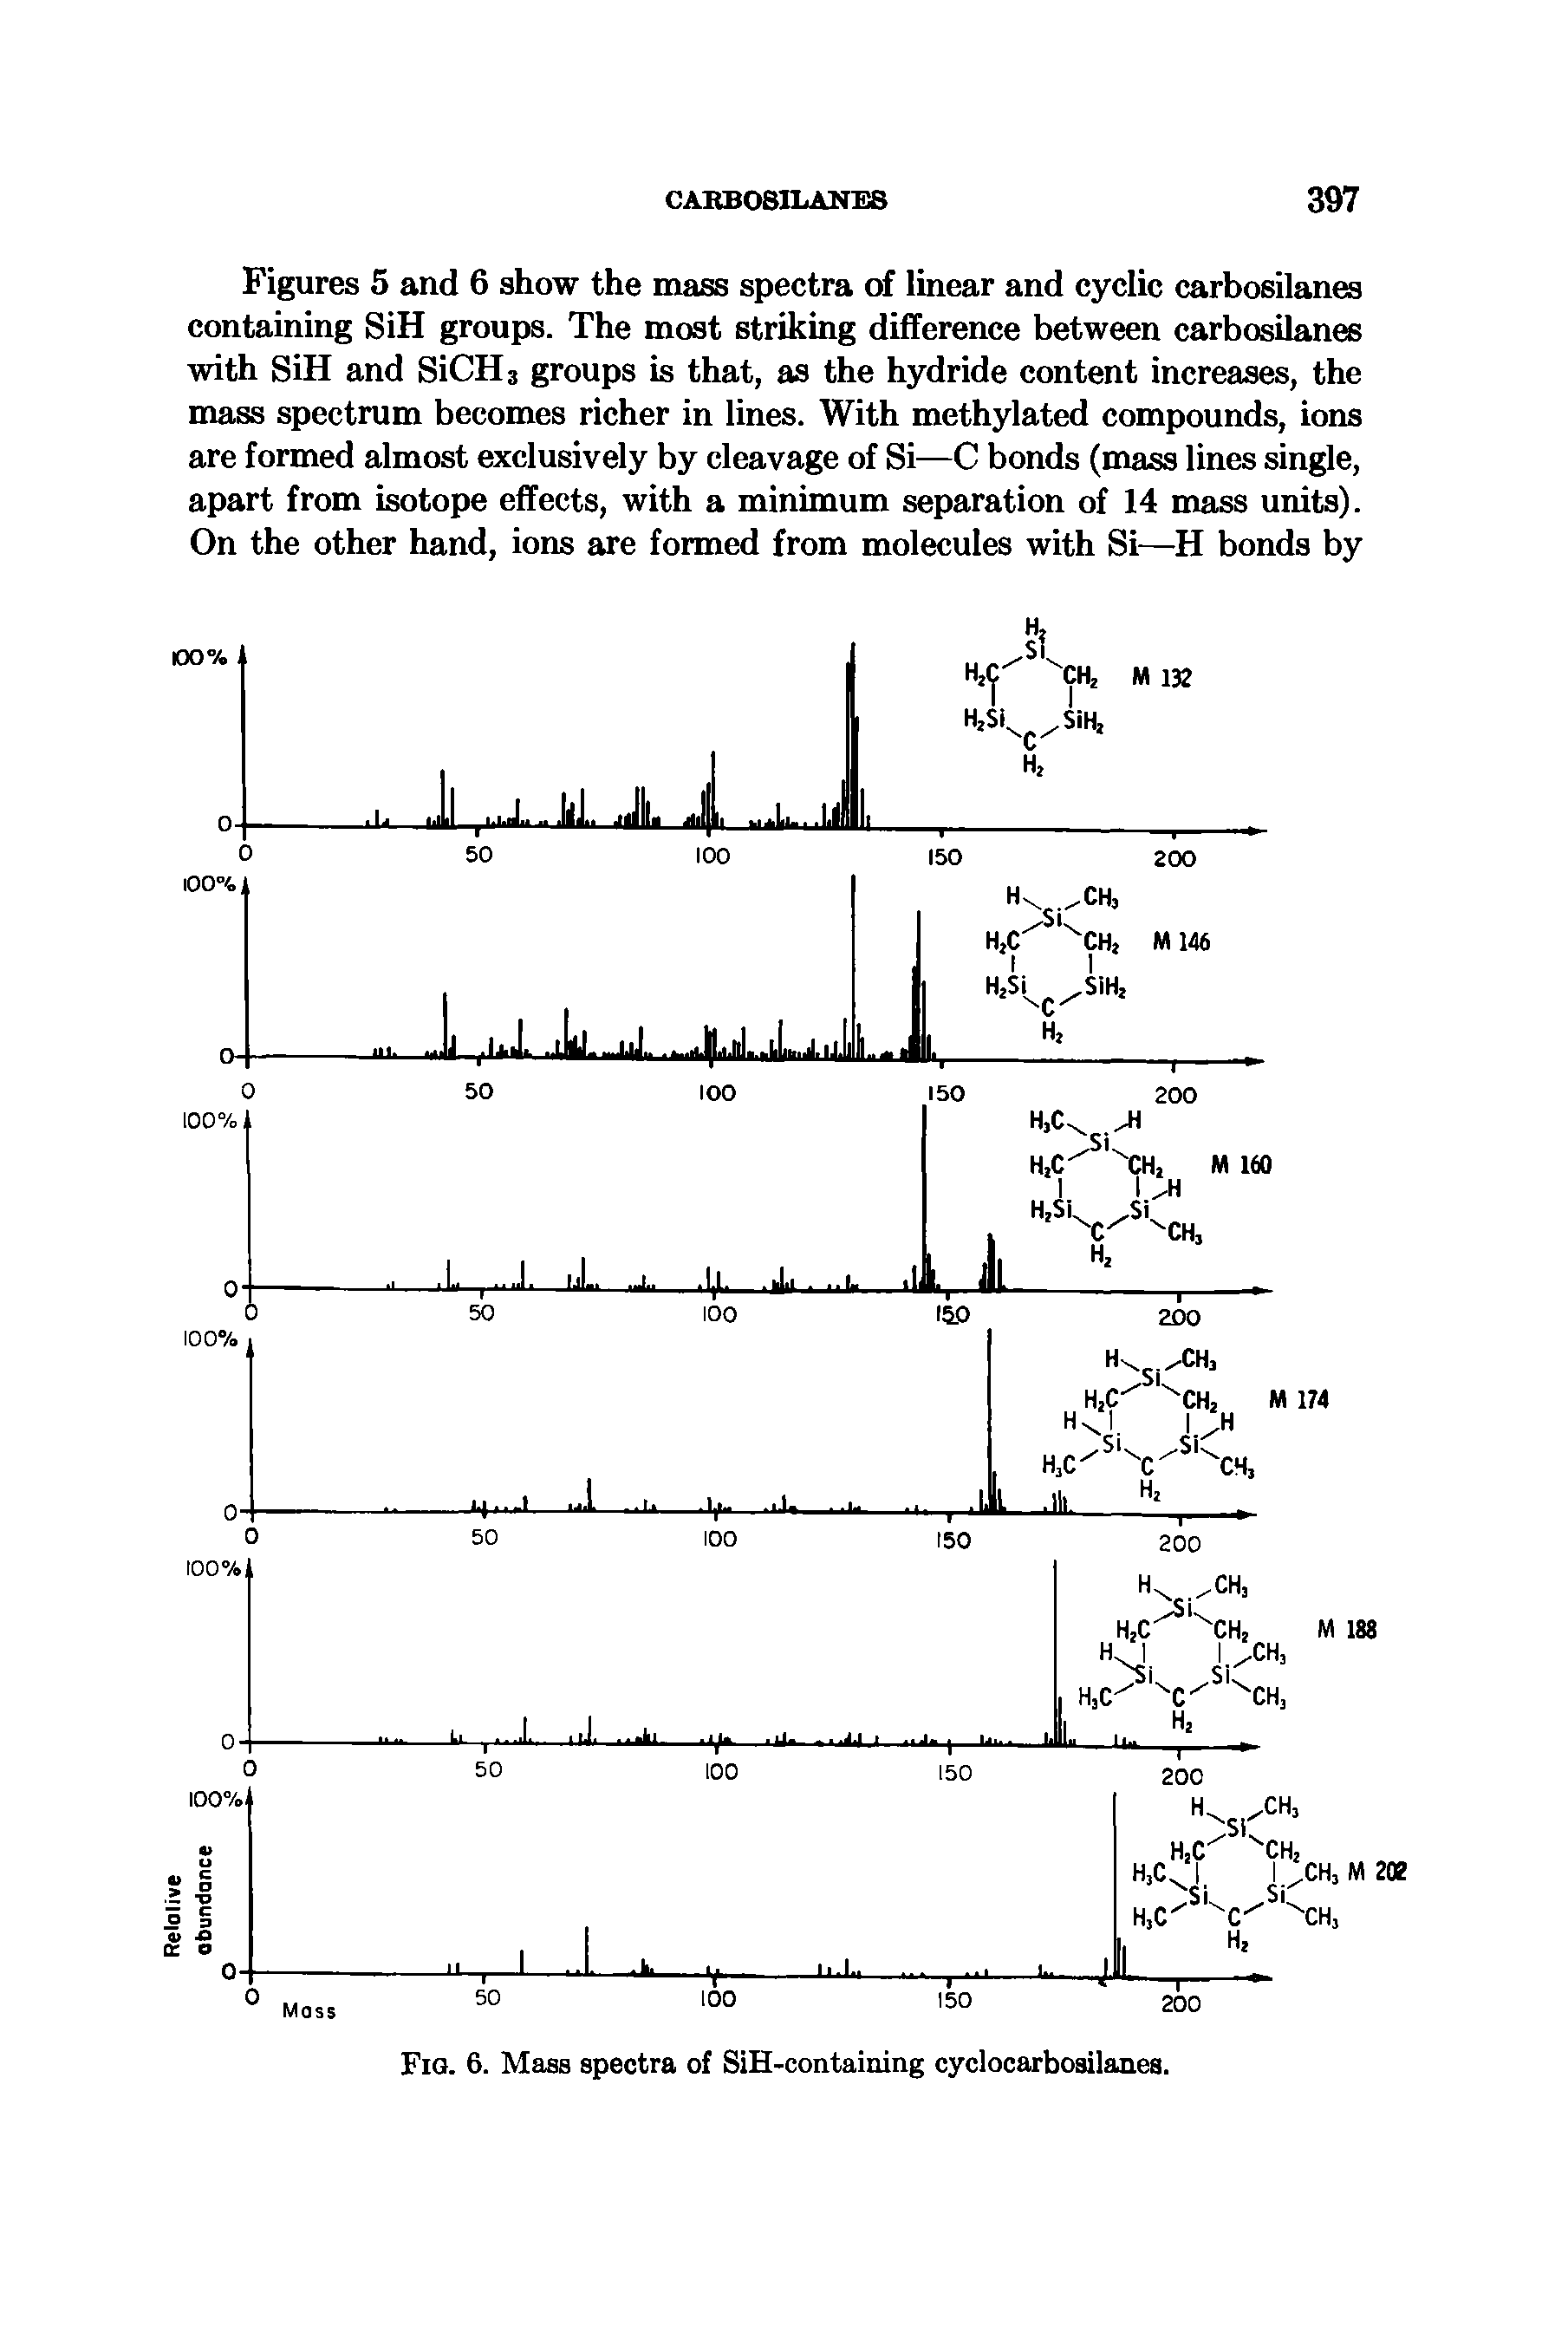 Figures 5 and 6 show the mass spectra of linear and cyclic carbosilanes containing SiH groups. The most striking difference between carbosilanes with SiH and SiCH3 groups is that, as the hydride content increases, the mass spectrum becomes richer in lines. With methylated compounds, ions are formed almost exclusively by cleavage of Si—C bonds (mass lines single, apart from isotope effects, with a minimum separation of 14 mass units). On the other hand, ions are formed from molecules with Si—H bonds by...